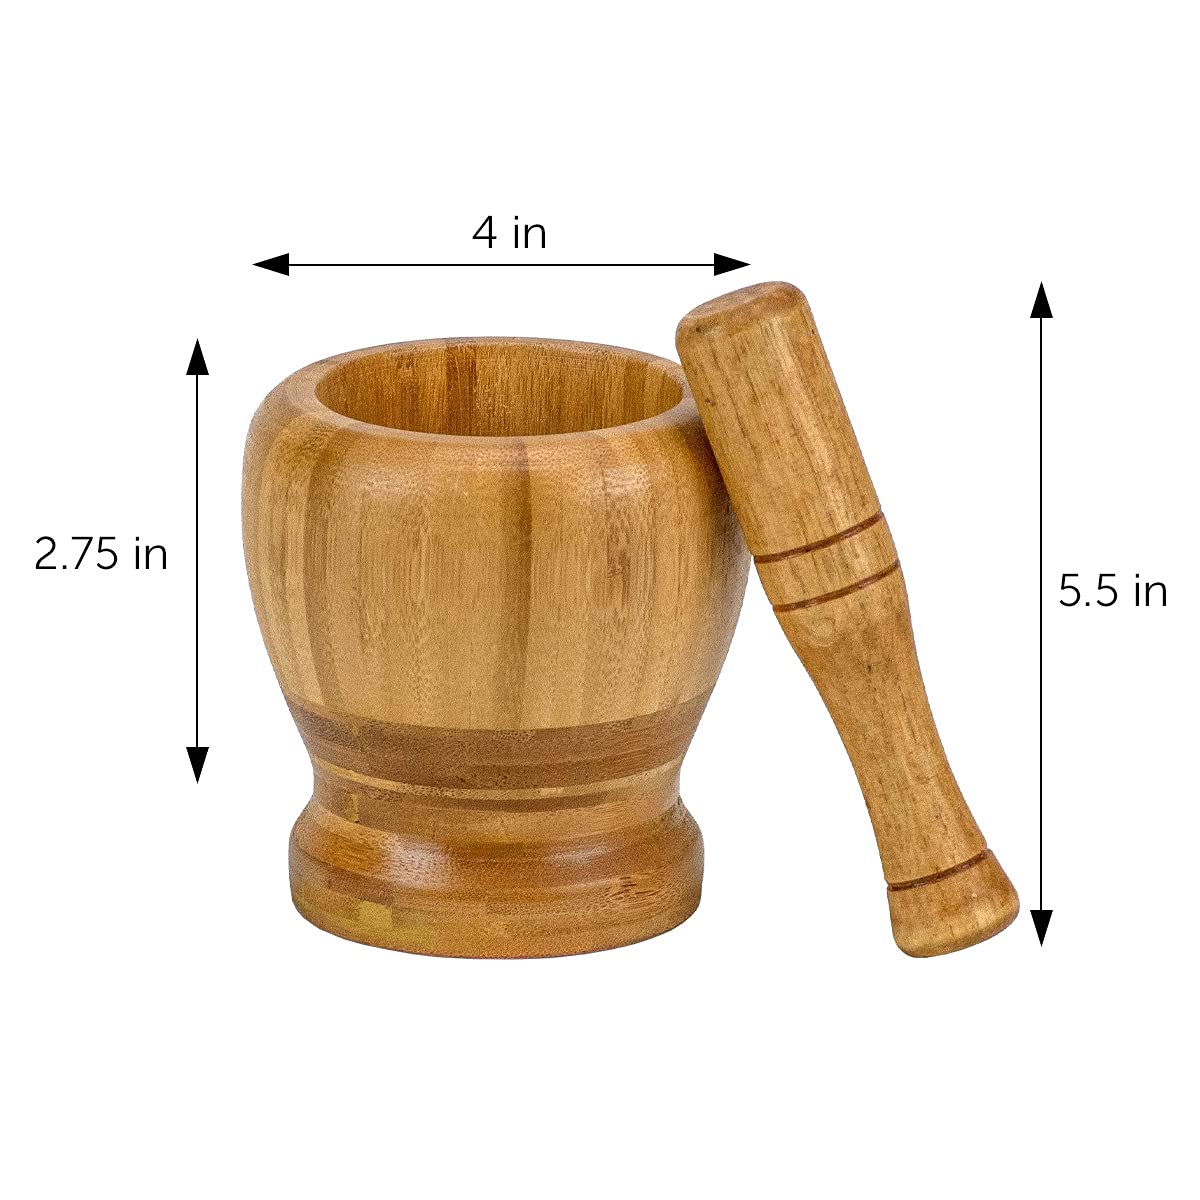 Light Wooden Spice Mixing Bowl - Mortar and Pestle Set